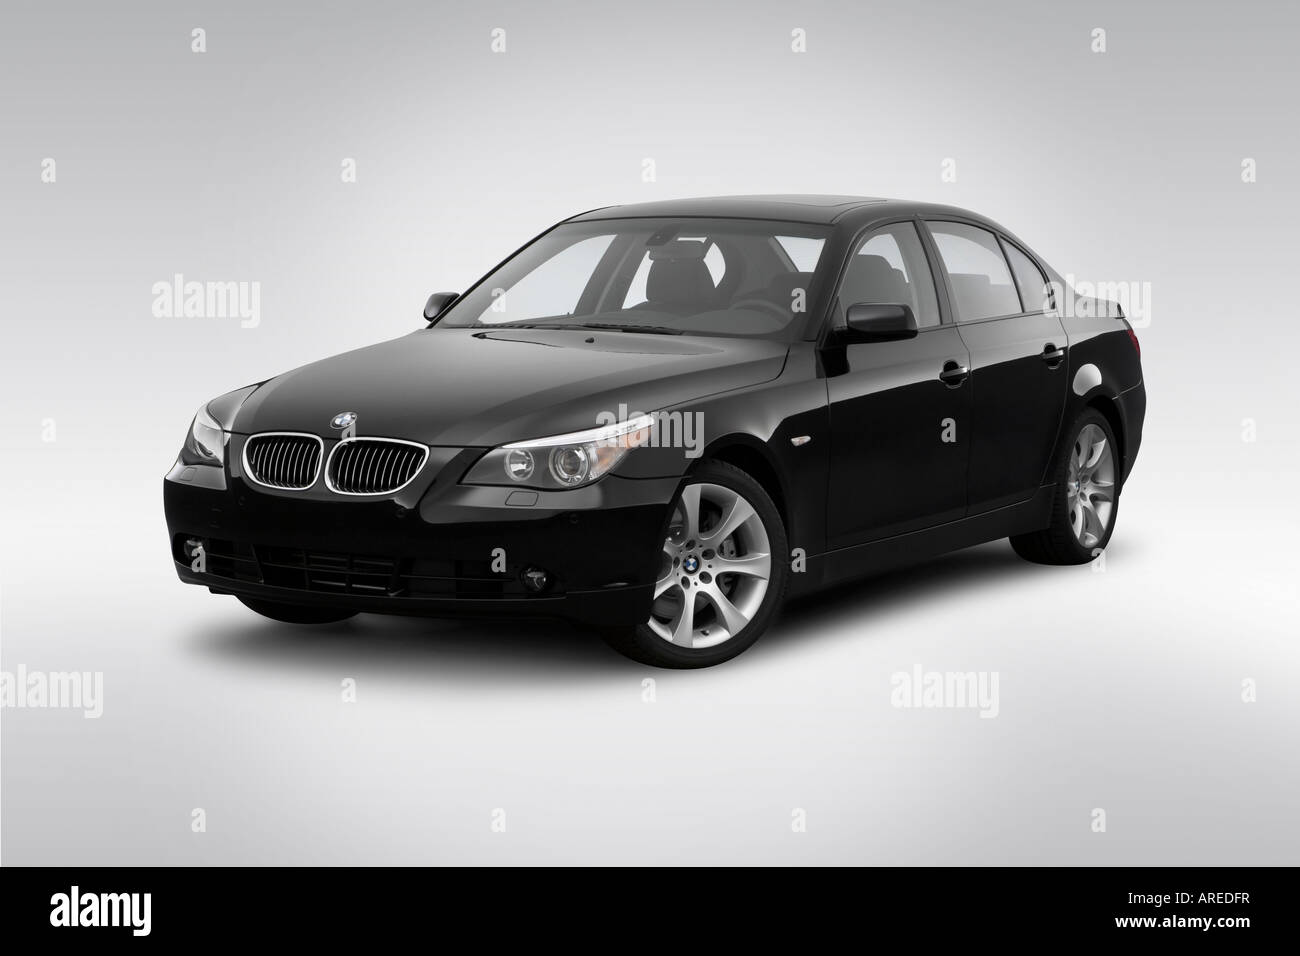 2006 BMW 5-series 550i in Black - Front angle view Stock Photo - Alamy